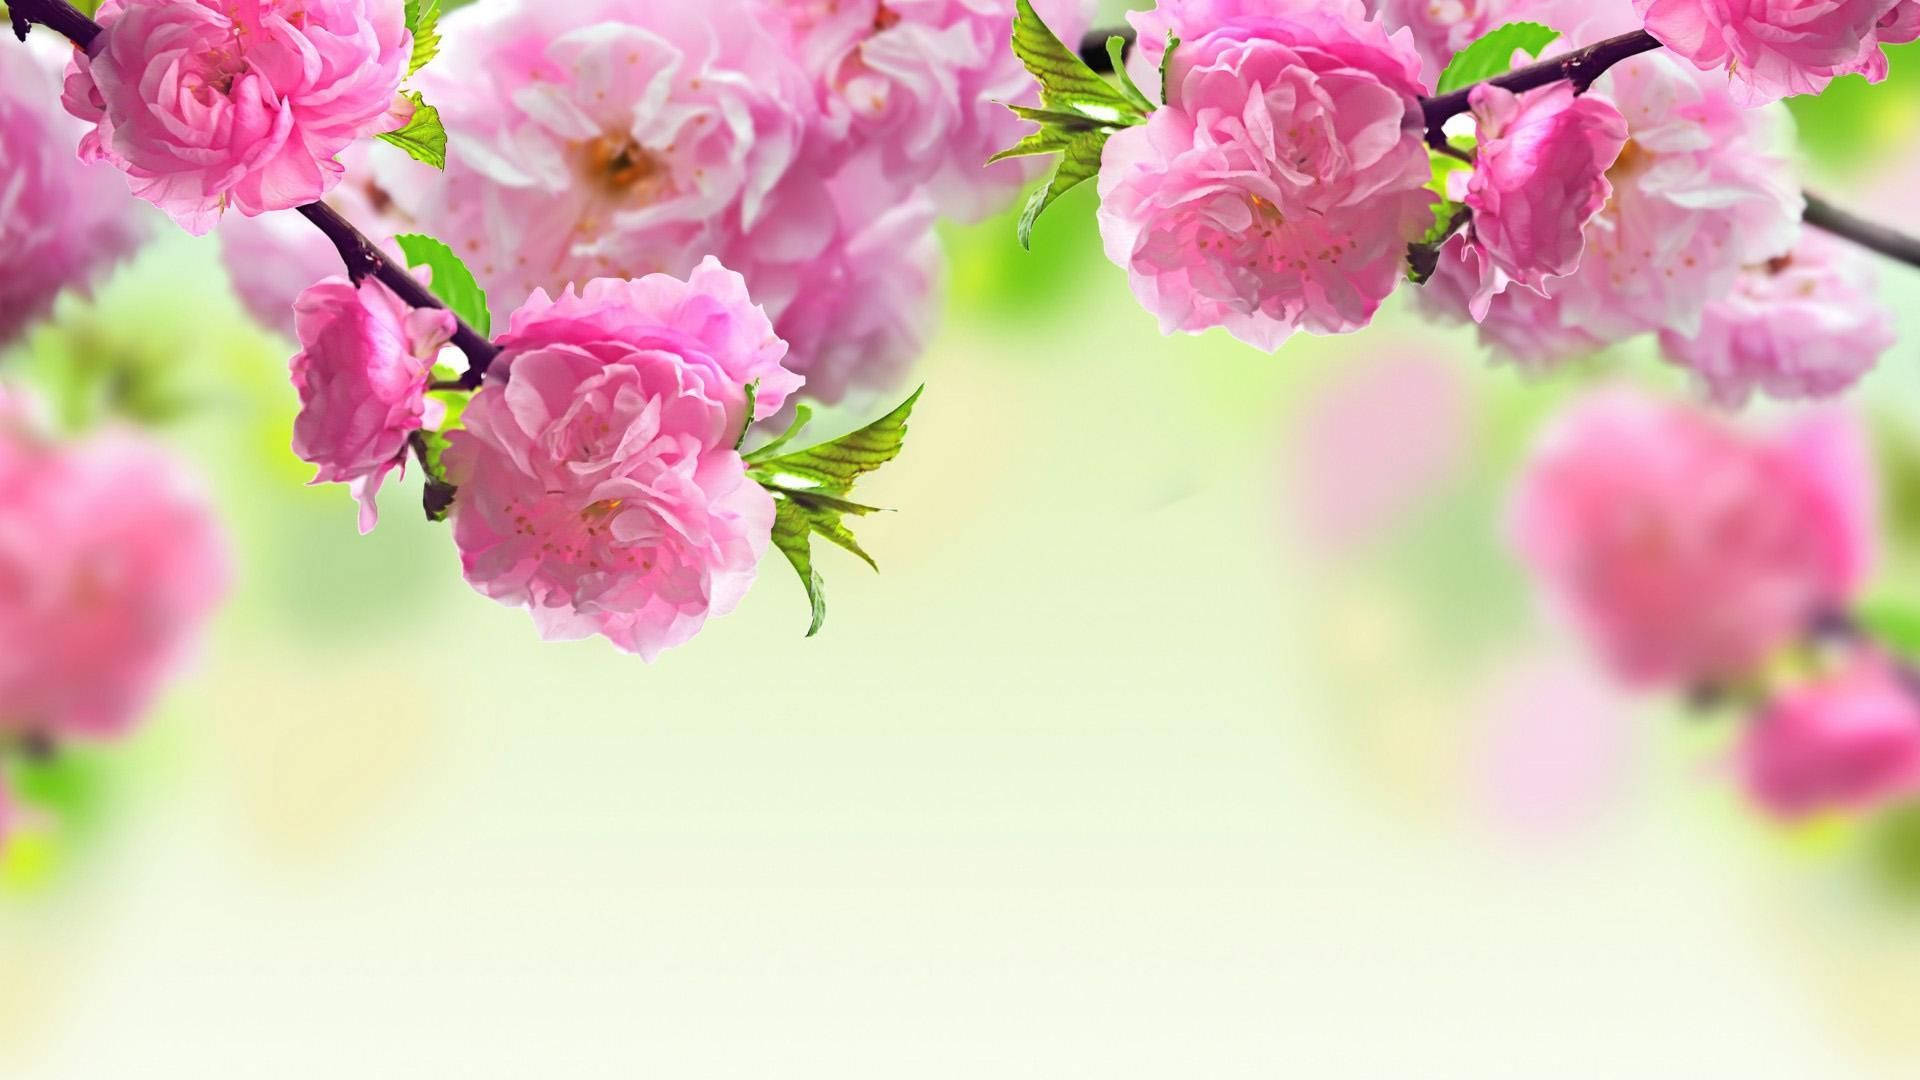 World's Most Beautiful Flowers Pink Roses Wallpaper